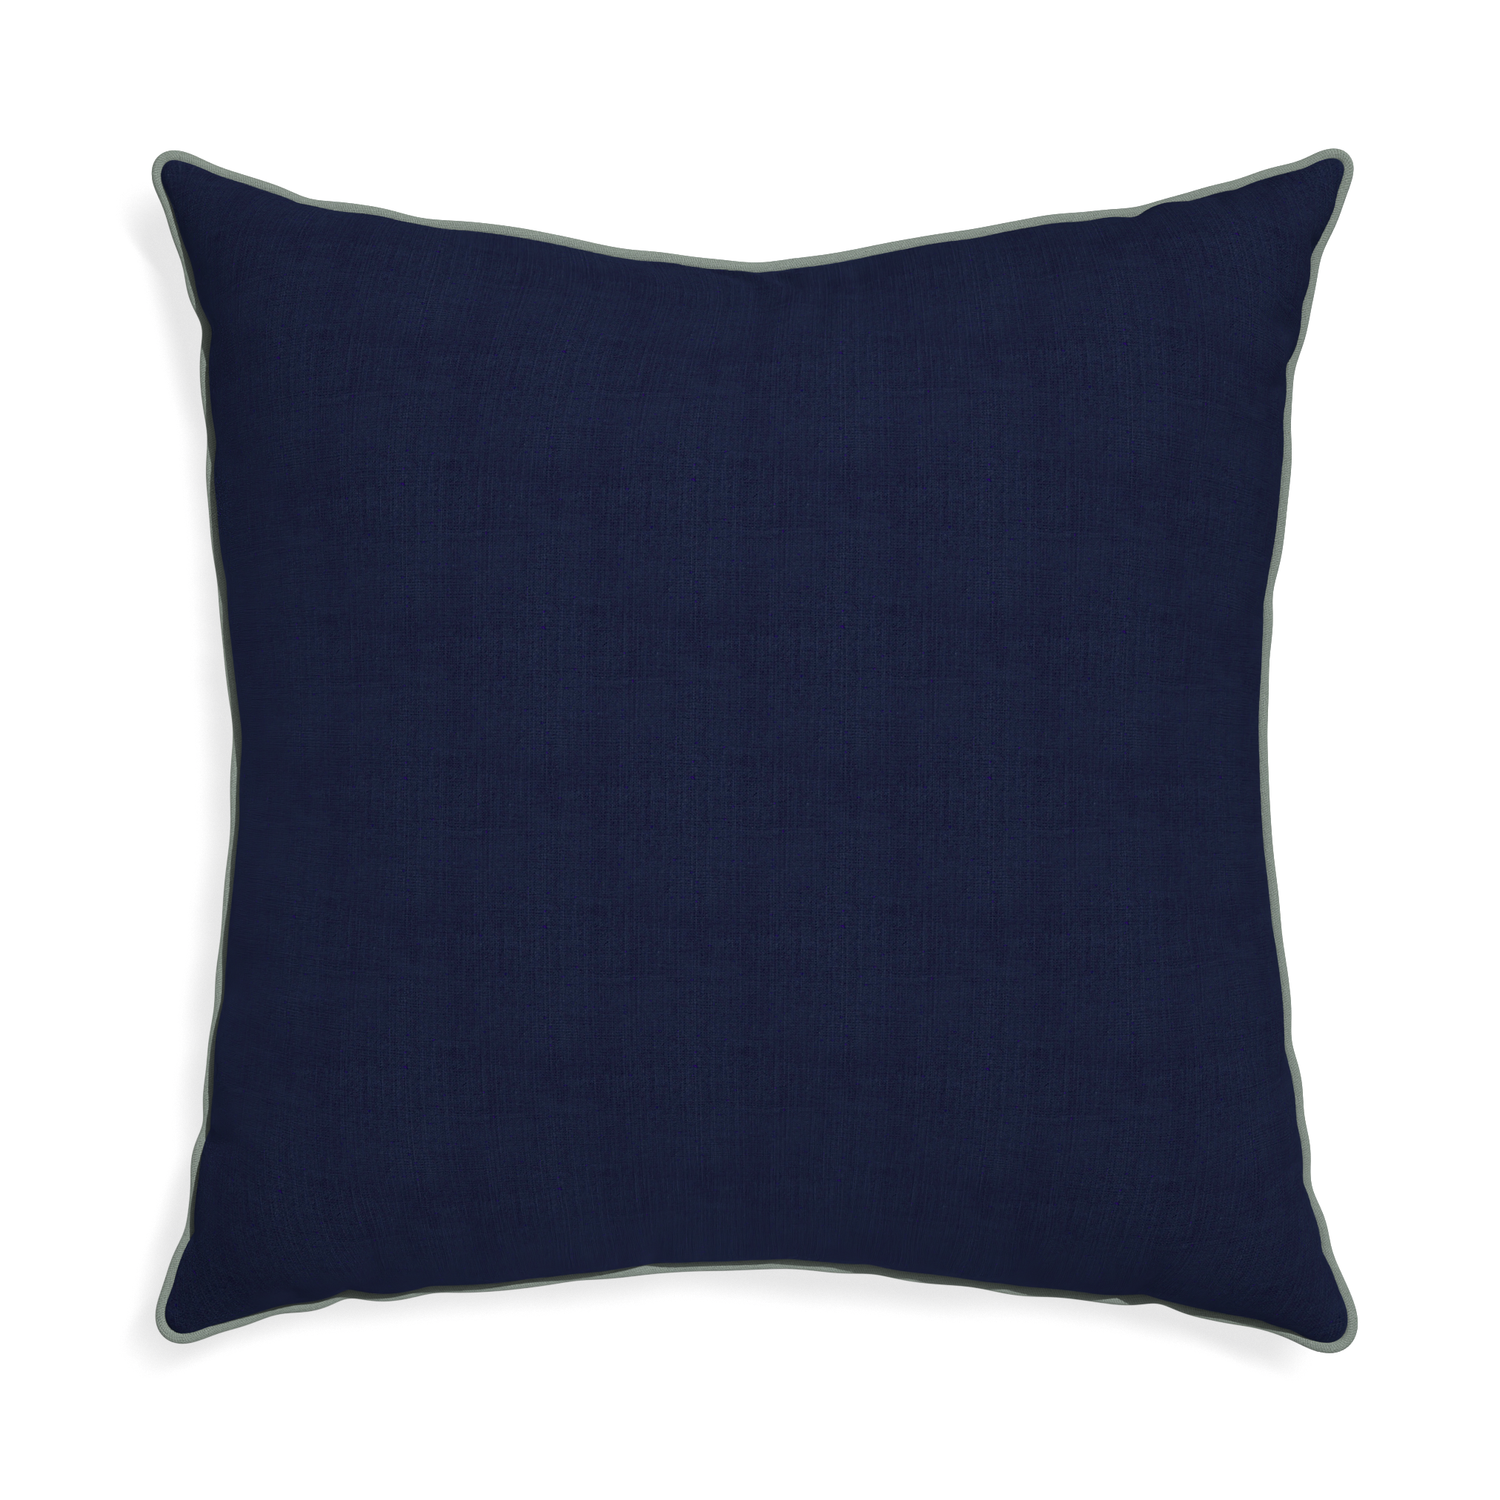 Euro-sham midnight custom navy bluepillow with sage piping on white background